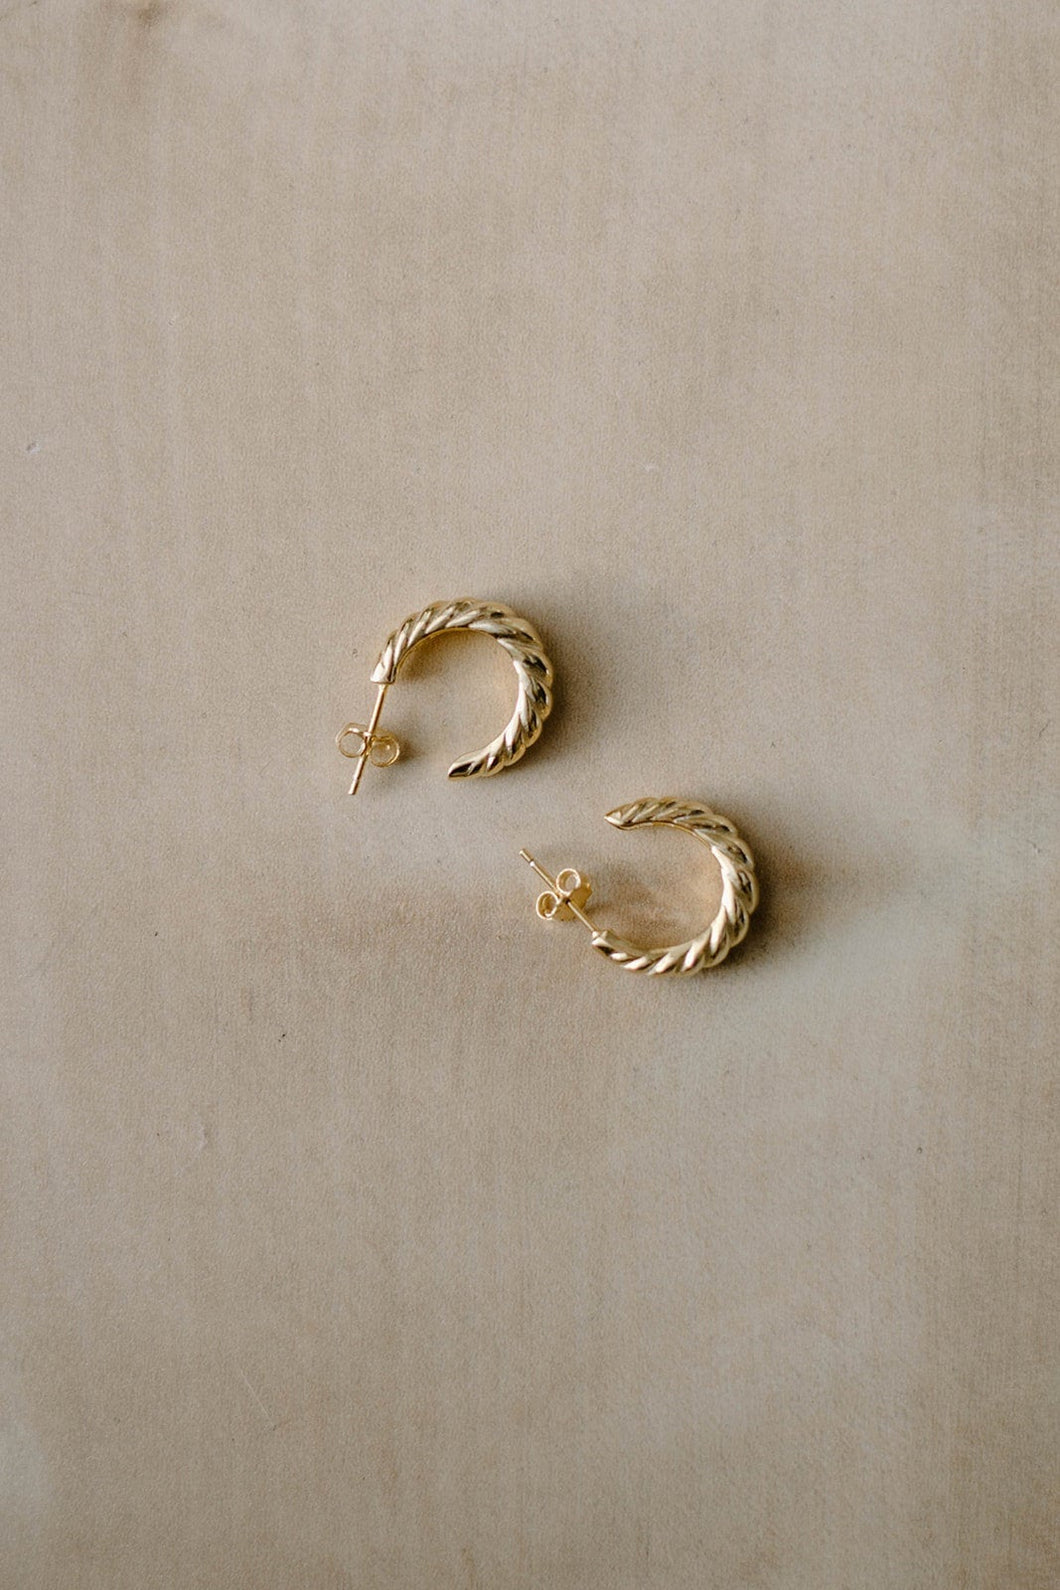 Croissant dome hoop earrings, 18K gold vermeil, 18k gold filled, spiral twist, crescent Dôme hoops, French vintage, chunky wreath earrings